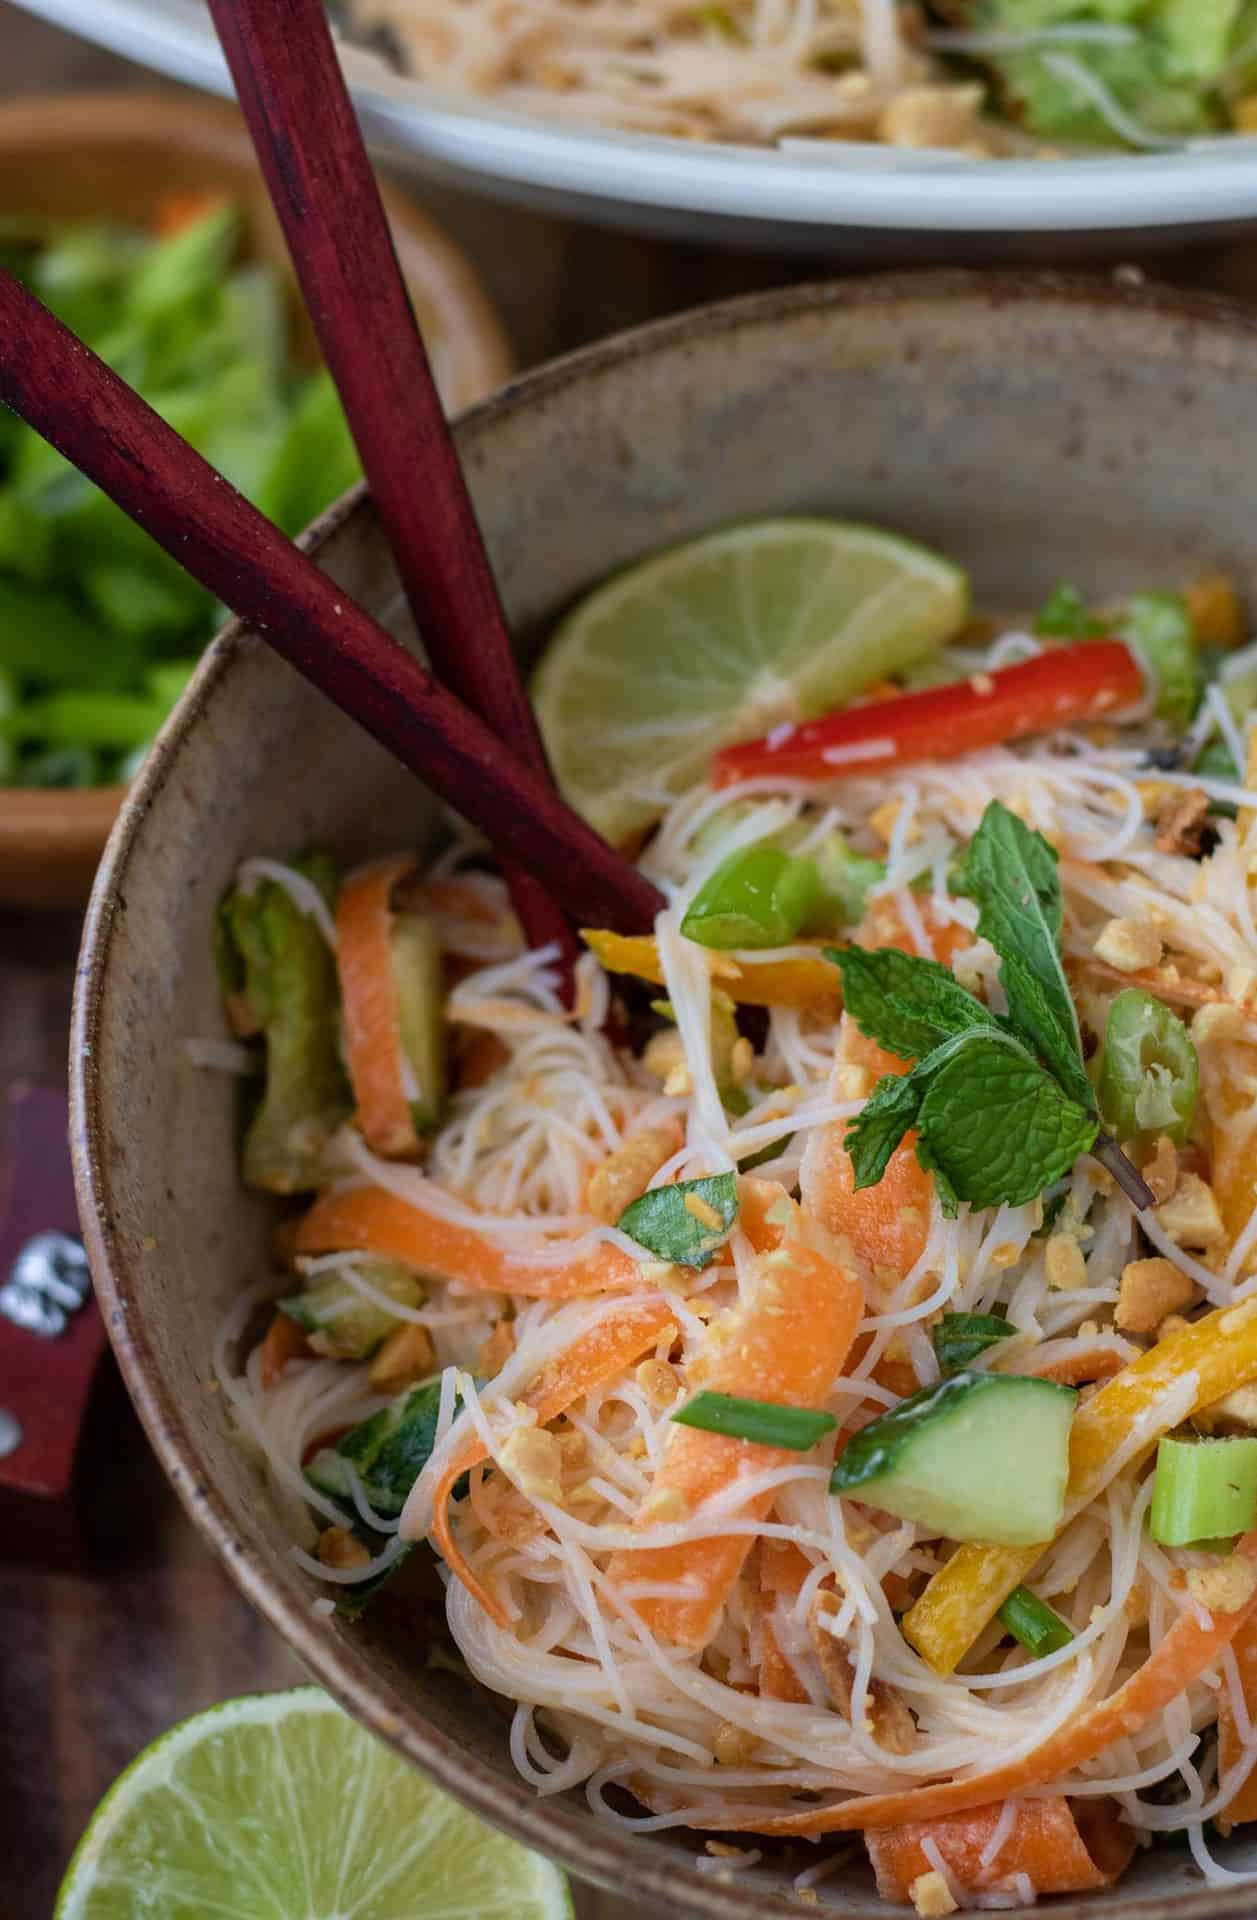 A brown speckled bowl filled with Thai noodle salad. You can see the ribbons of carrots, diced cucumbers and sliced bell peppers. It's garnished with crushed peanuts and there's two chopsticks sticking out of the bowl